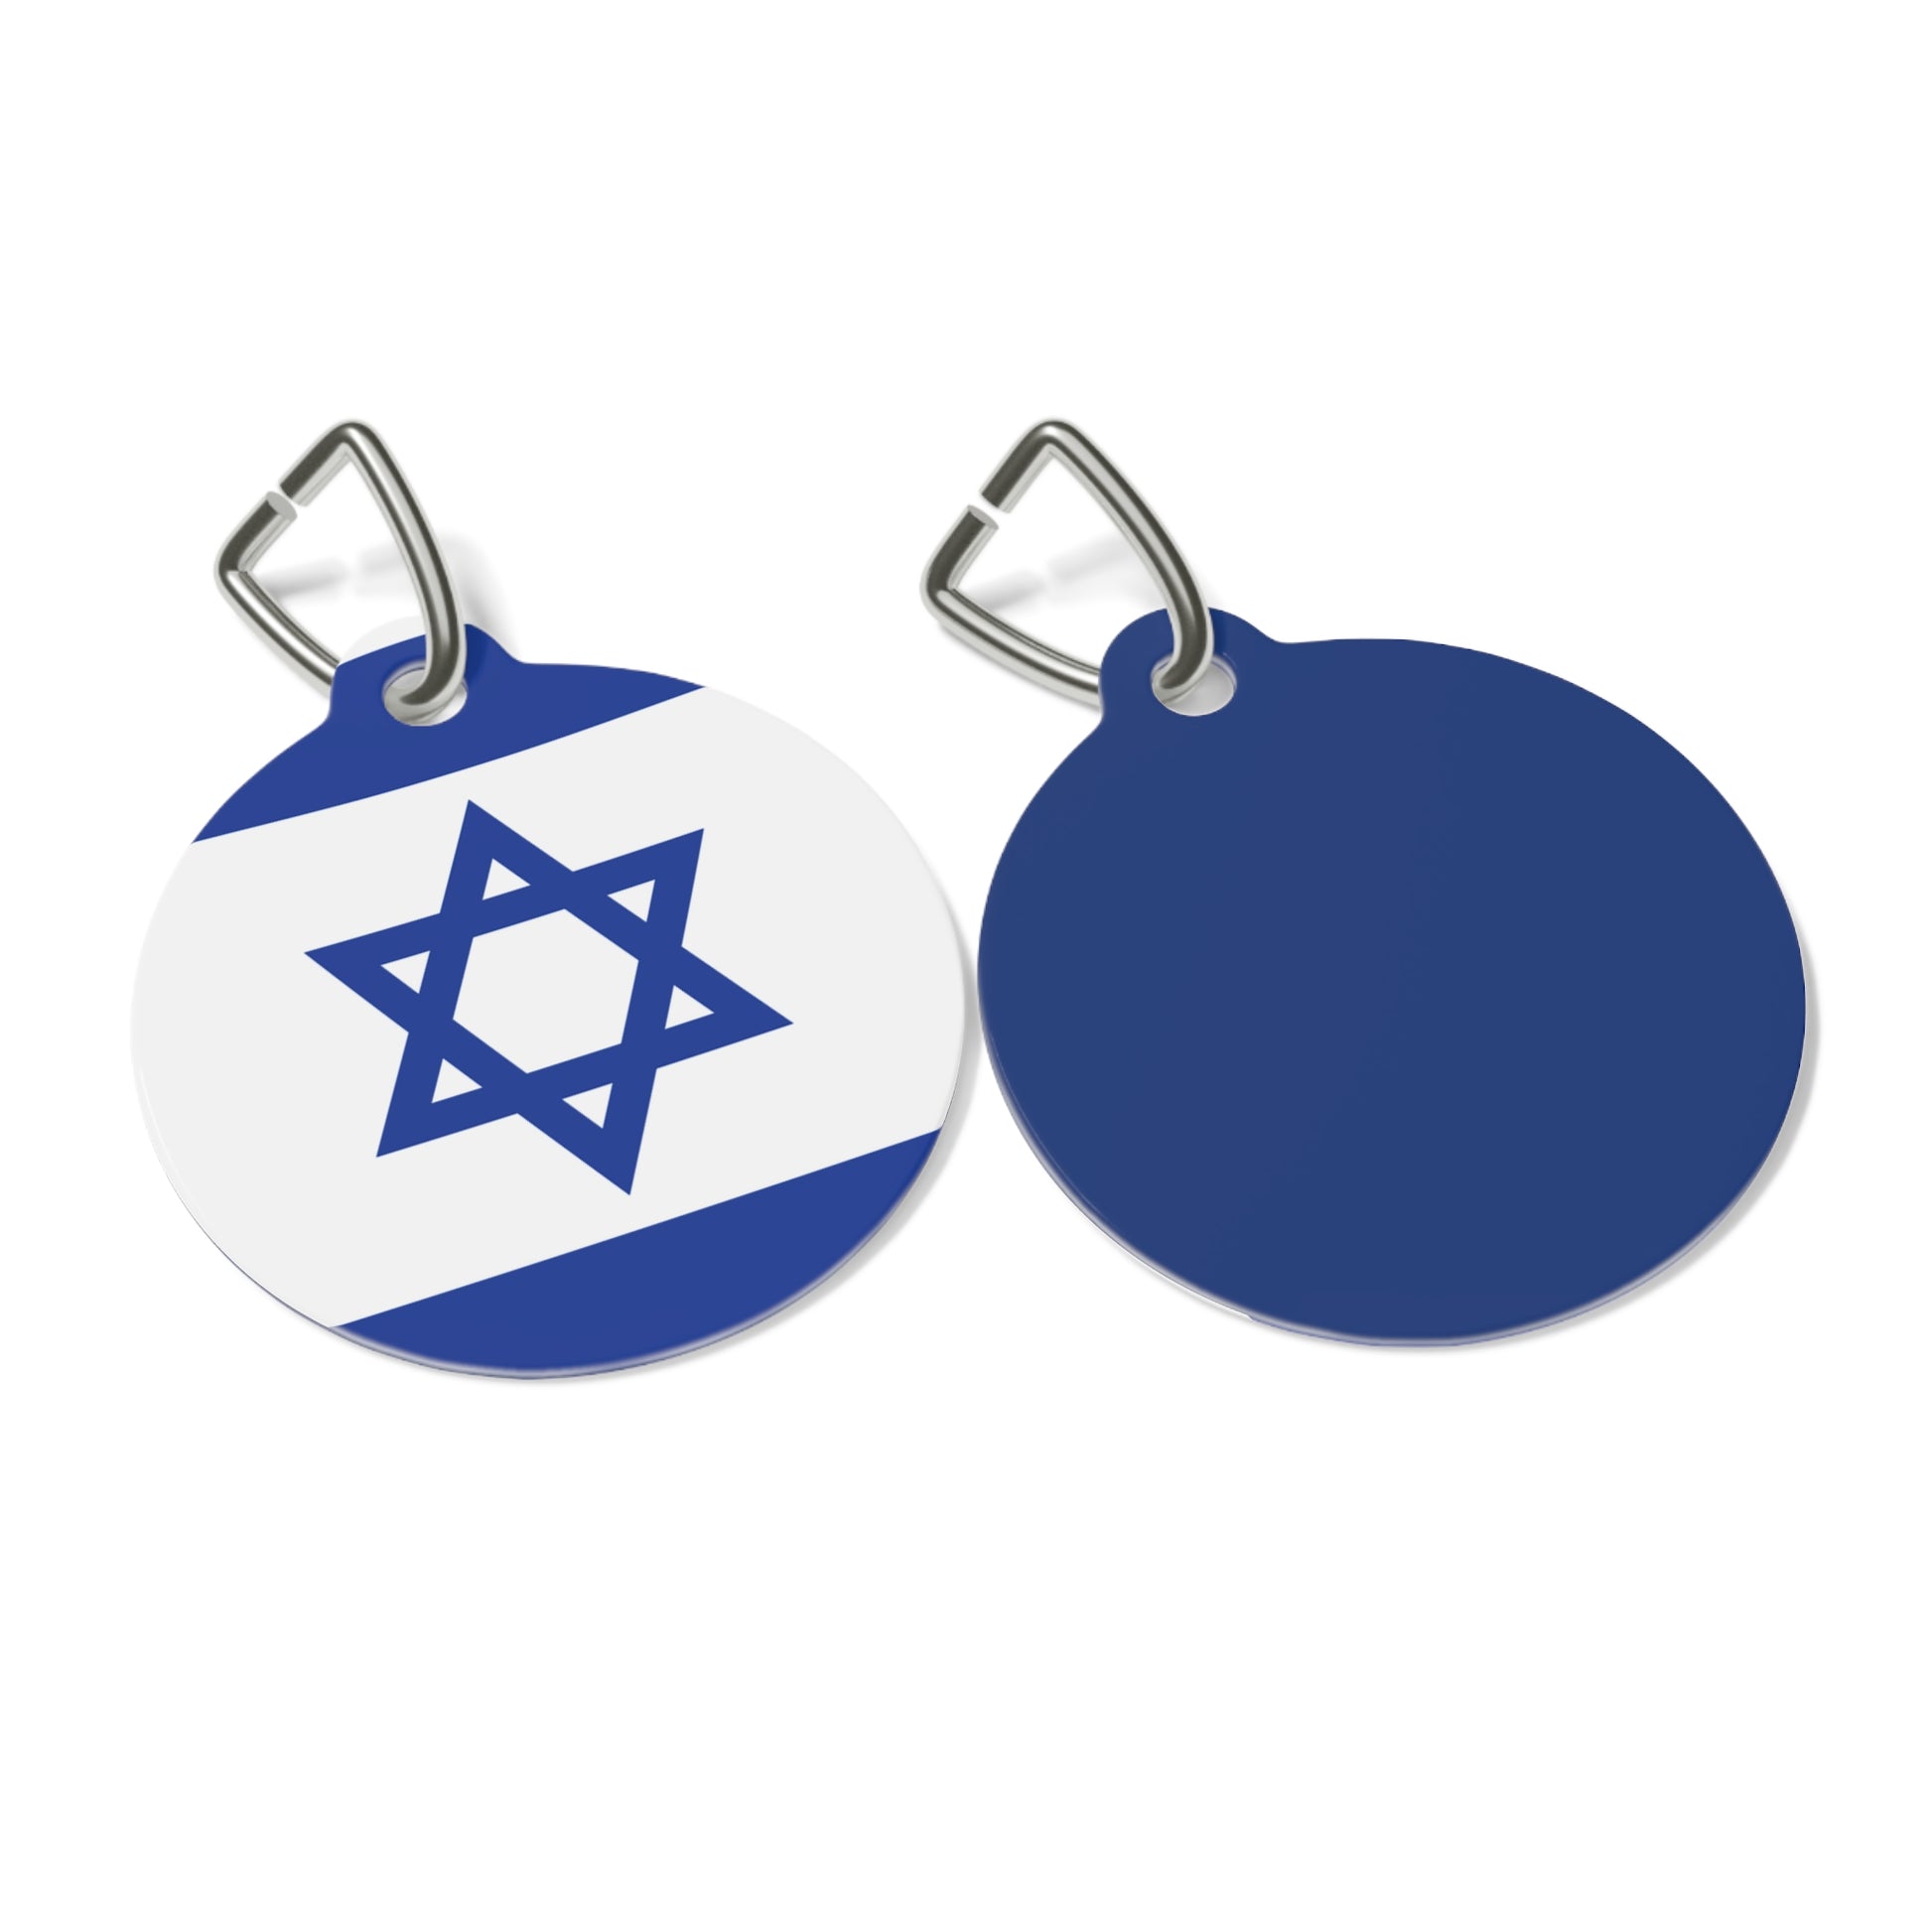 Israeli Flag Pet Tag front and back